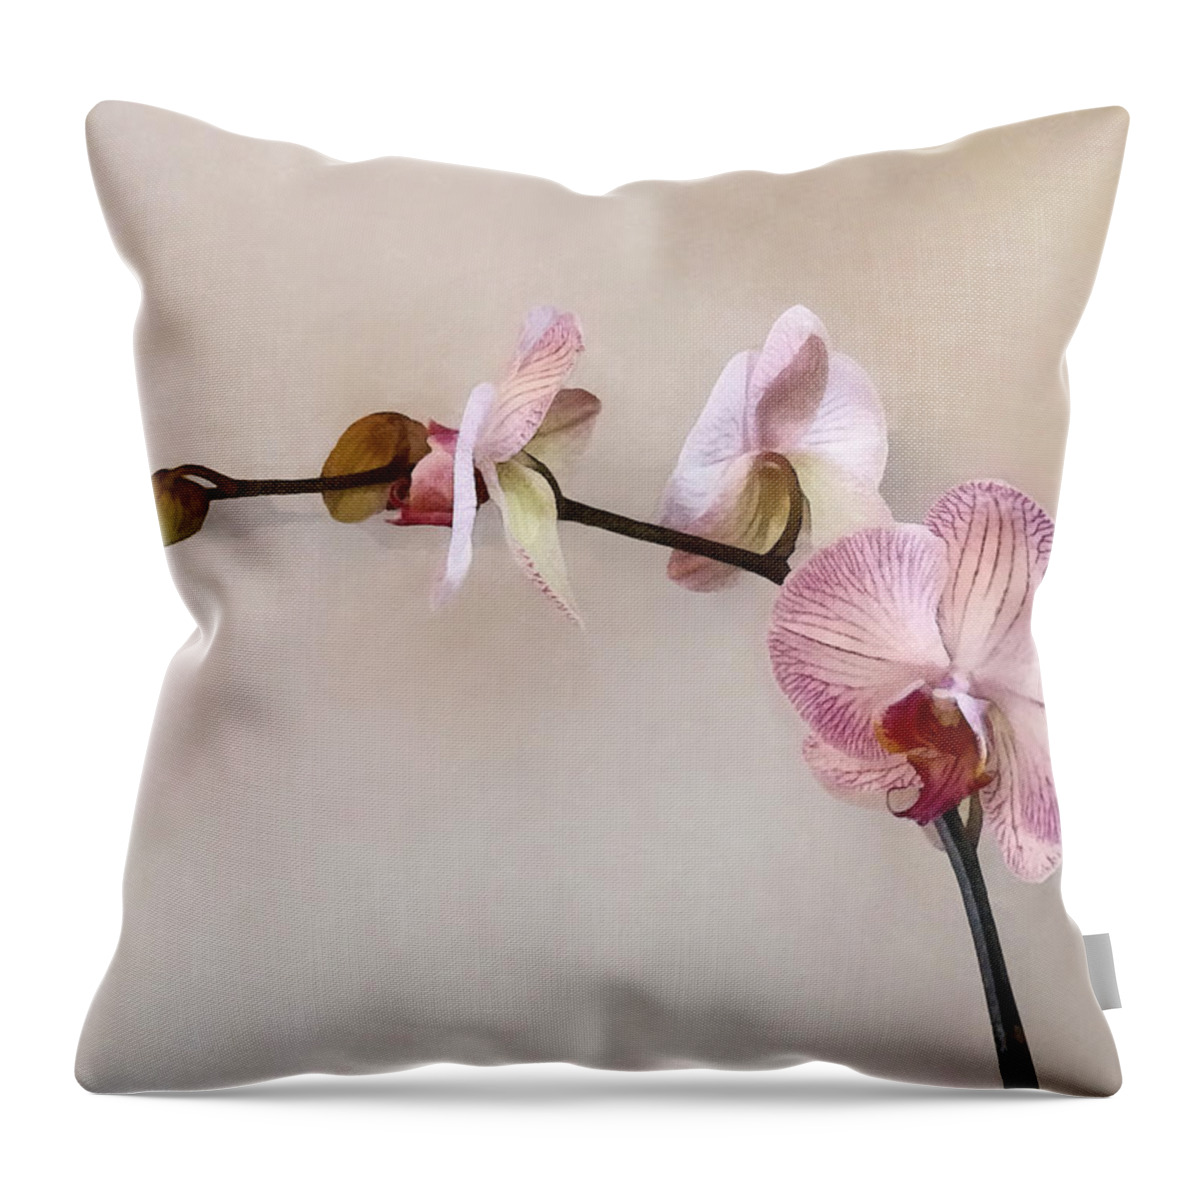 Phalaenopsis Throw Pillow featuring the photograph Delicate Pink Phalaenopsis Orchids by Susan Savad